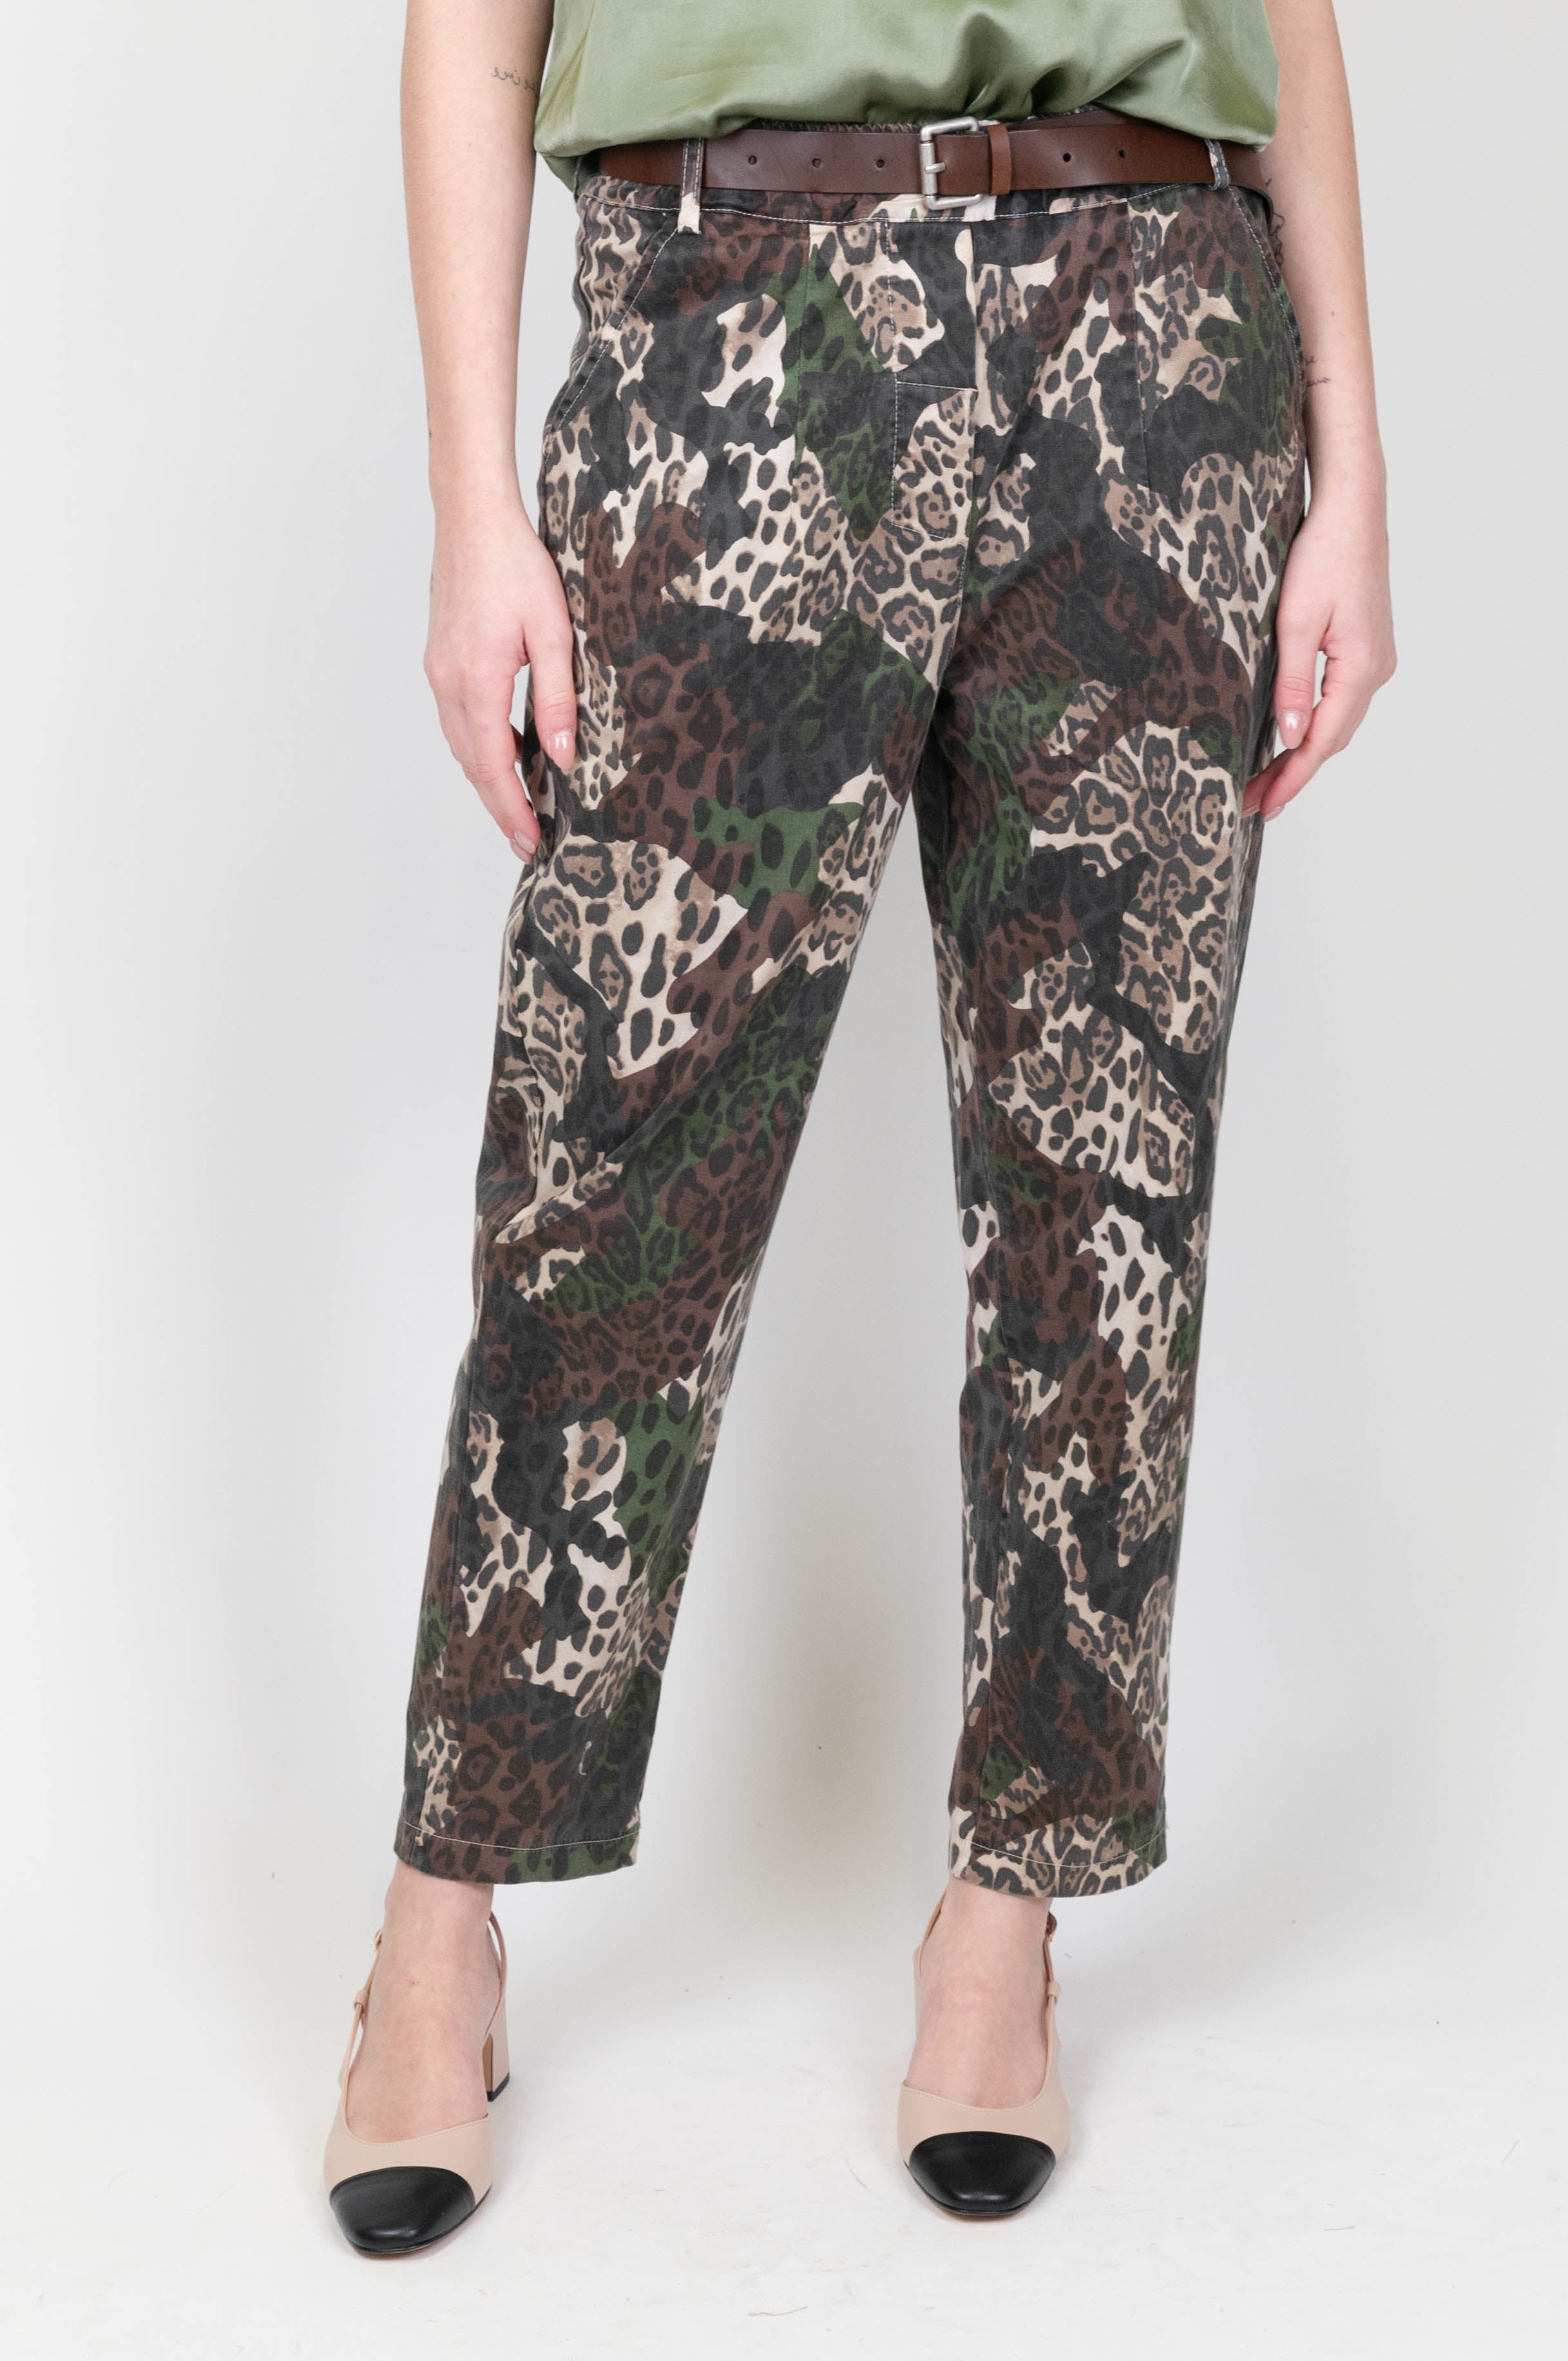 Motel - Camouflage trousers with animal print